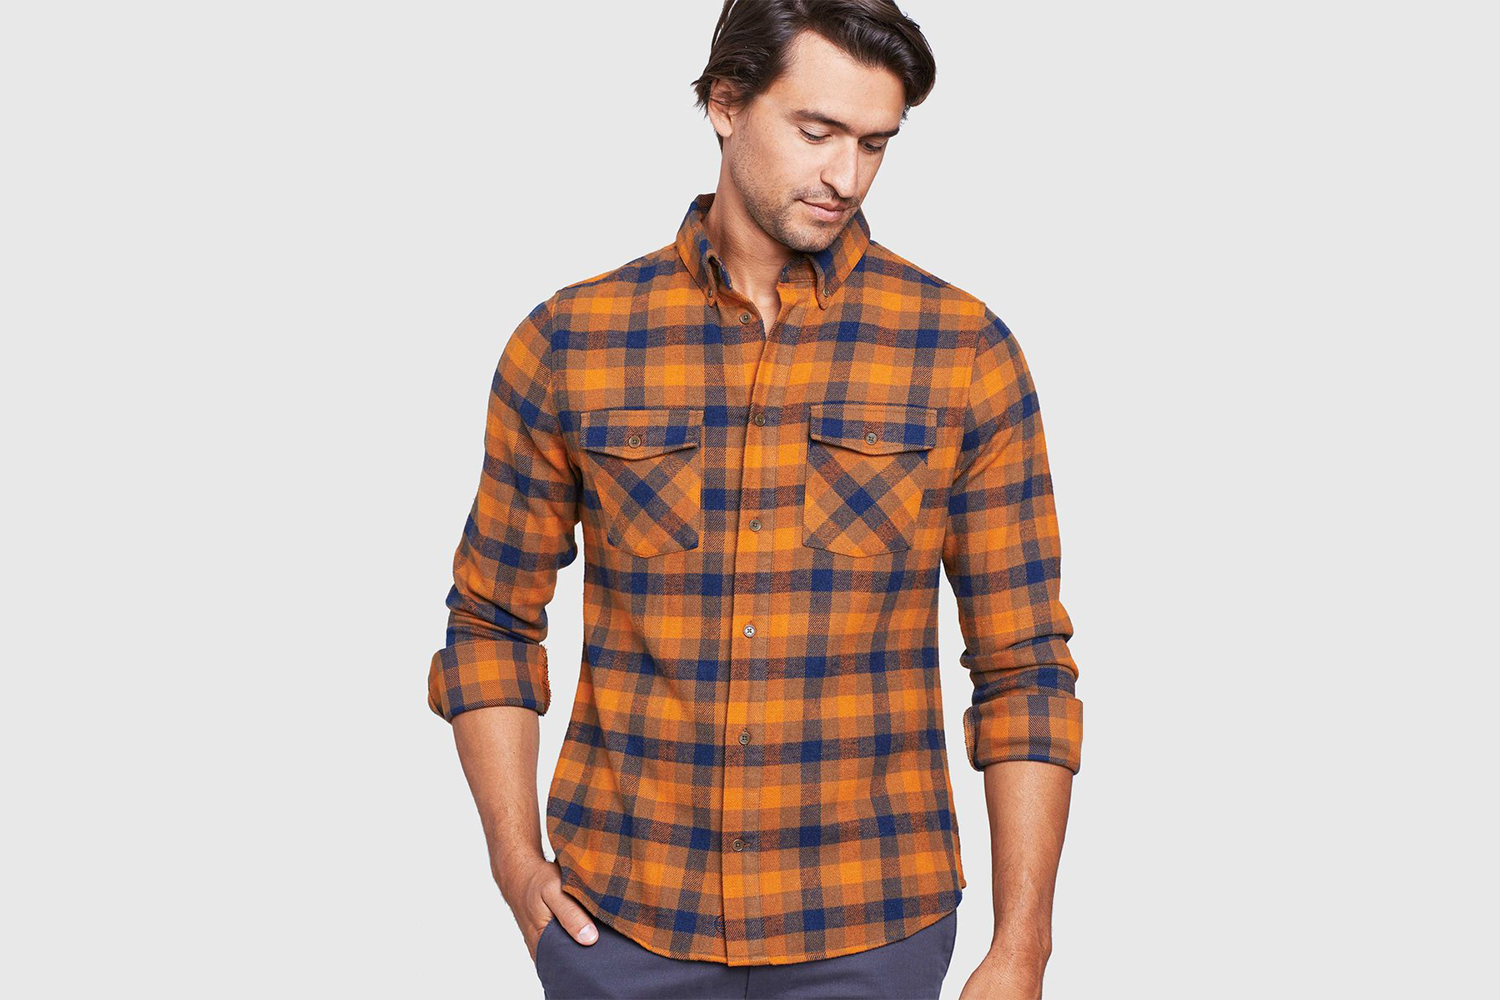 The Men's Responsible Flannel from United By Blue